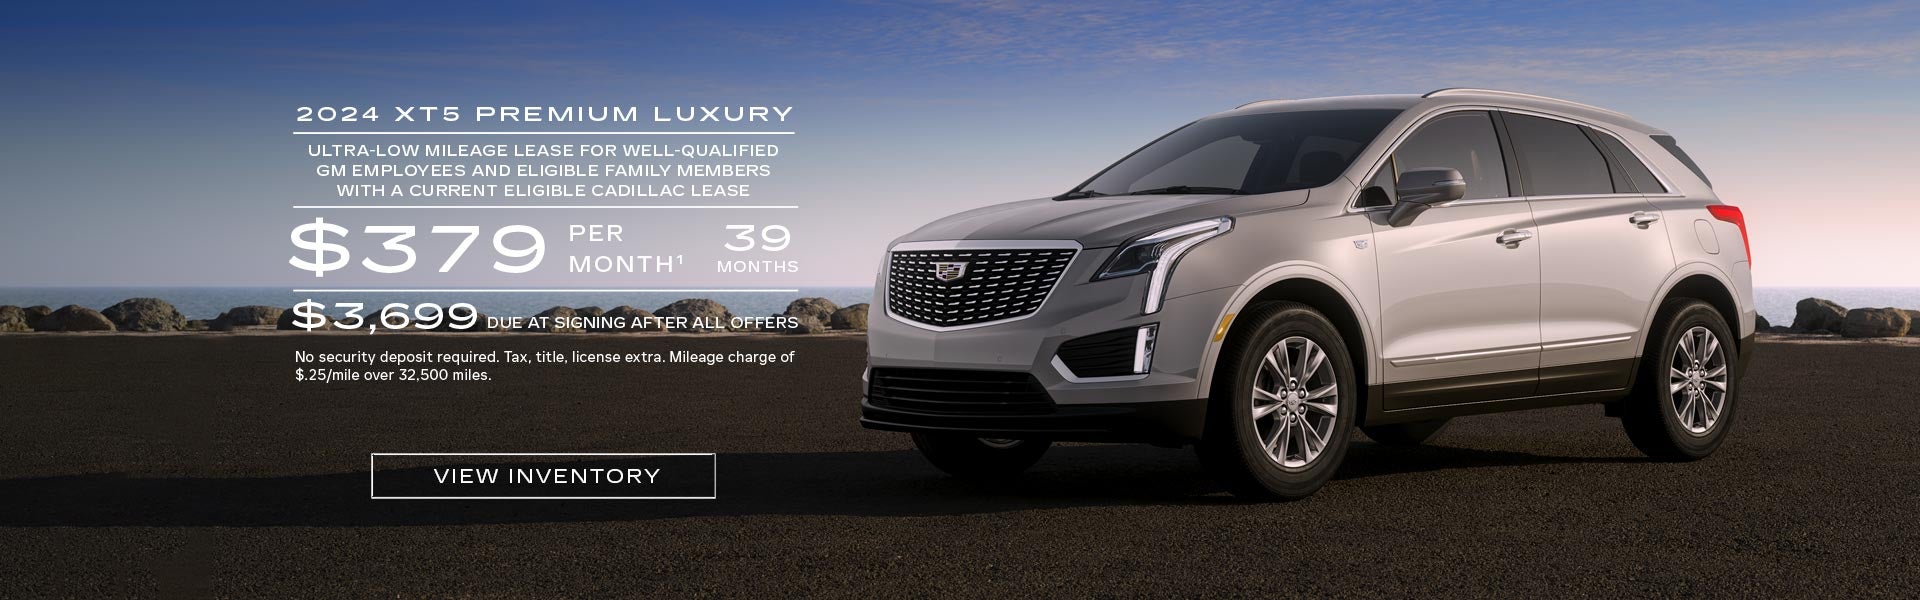 2024 XT5 Premium Luxury. Ultra-low mileage lease for well-qualified current eligible GM employees...